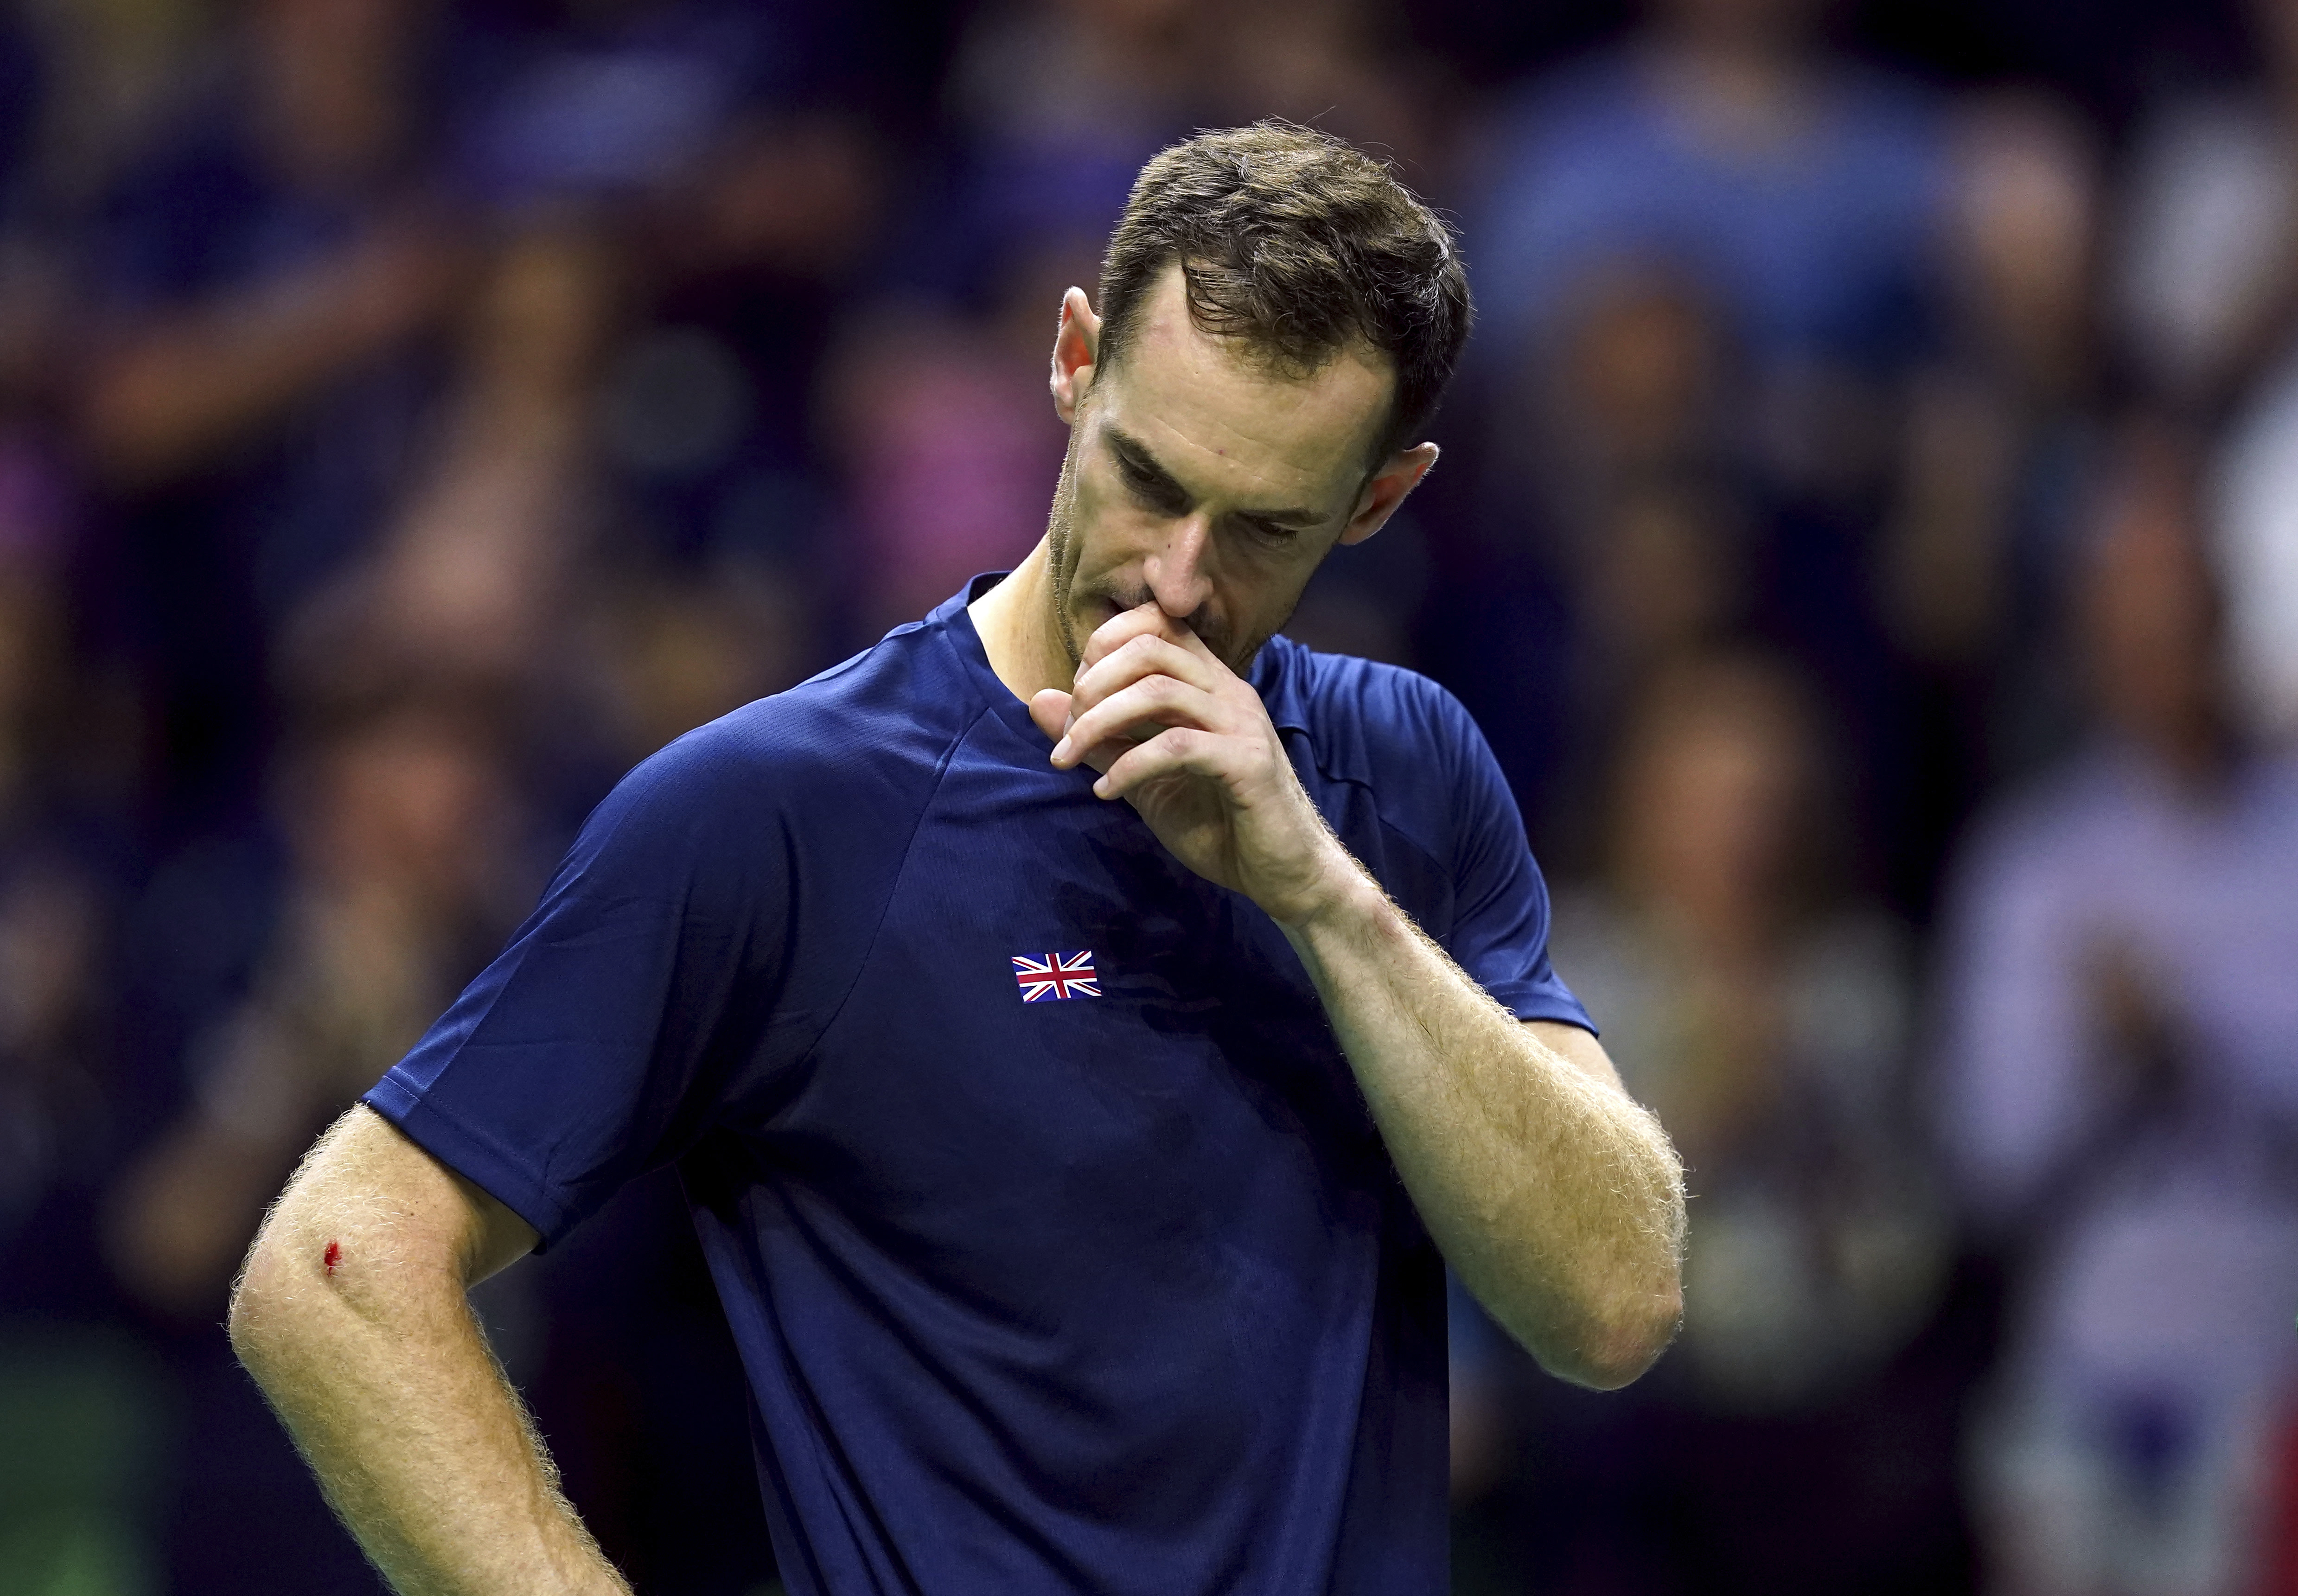 Andy Murray dedicates Davis Cup Finals win to late grandmother on day of her funeral